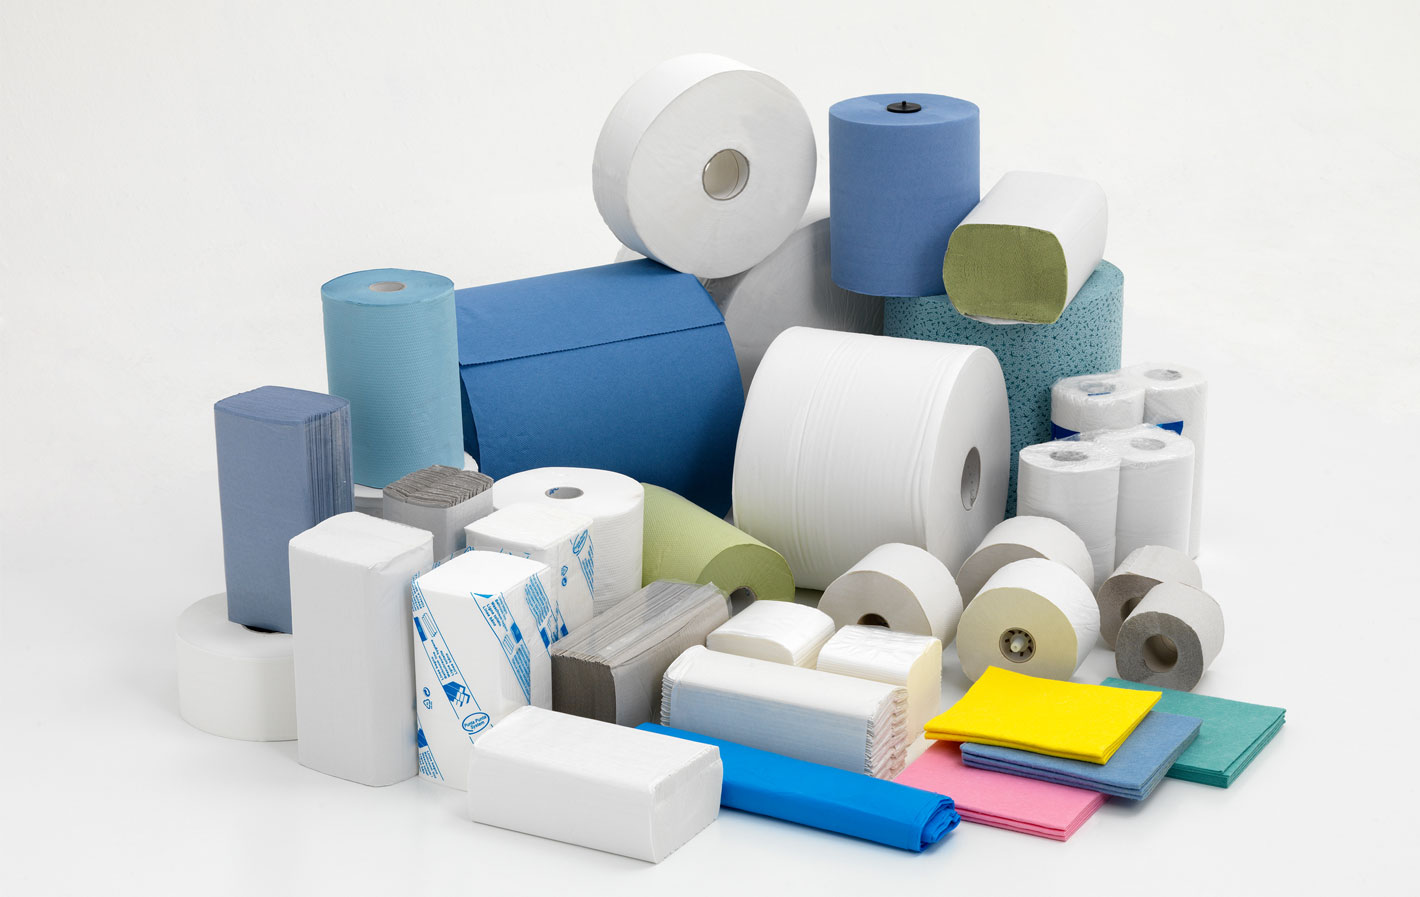 Wholesale Wiping Supplies & Paper Products for Home or Office